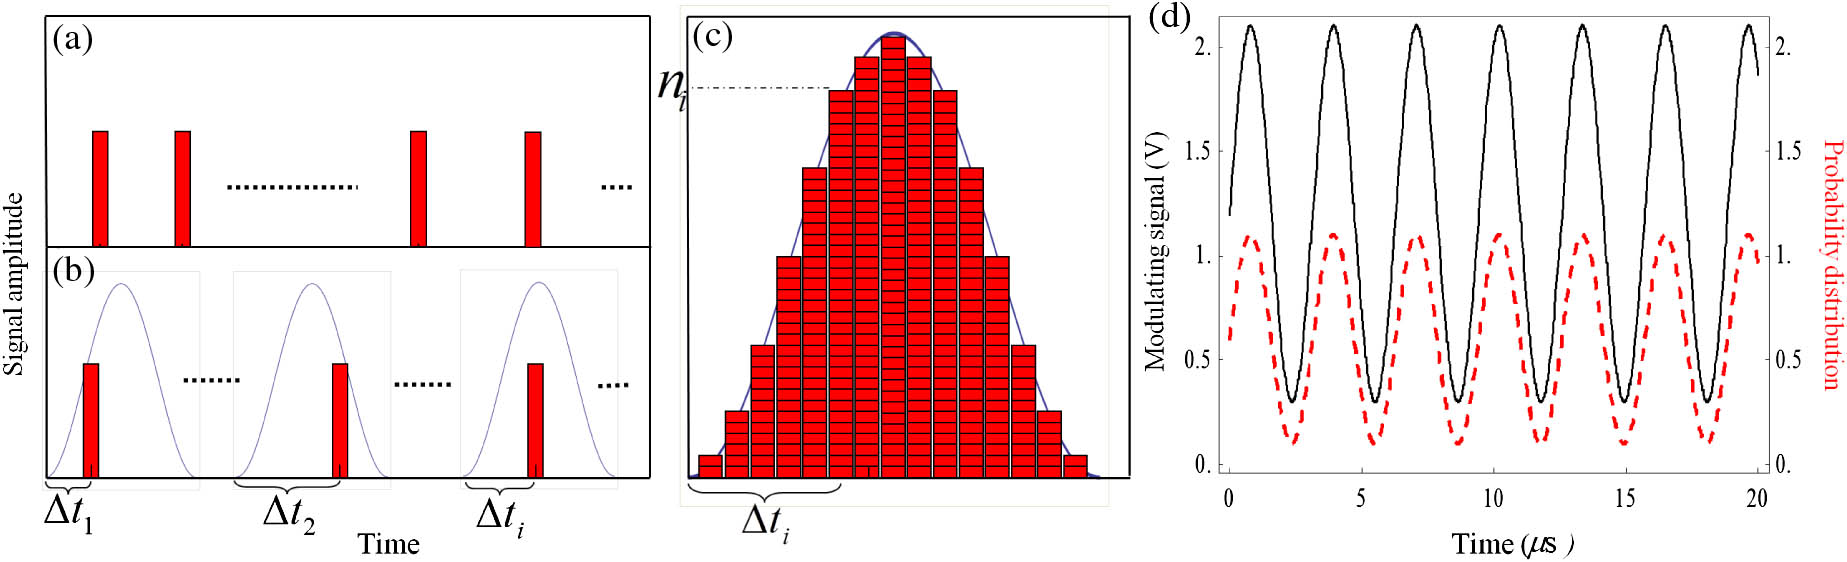 Schematic diagram of the single photon modulation process: (a) single photons appear randomly without modulation; (b) distribution of single photons’ timing sequence changed with the modulation; (c) statistics diagram of Δti; (d) probability distribution of single photons which follows the sine distribution (dashed line indicates the probability distribution).